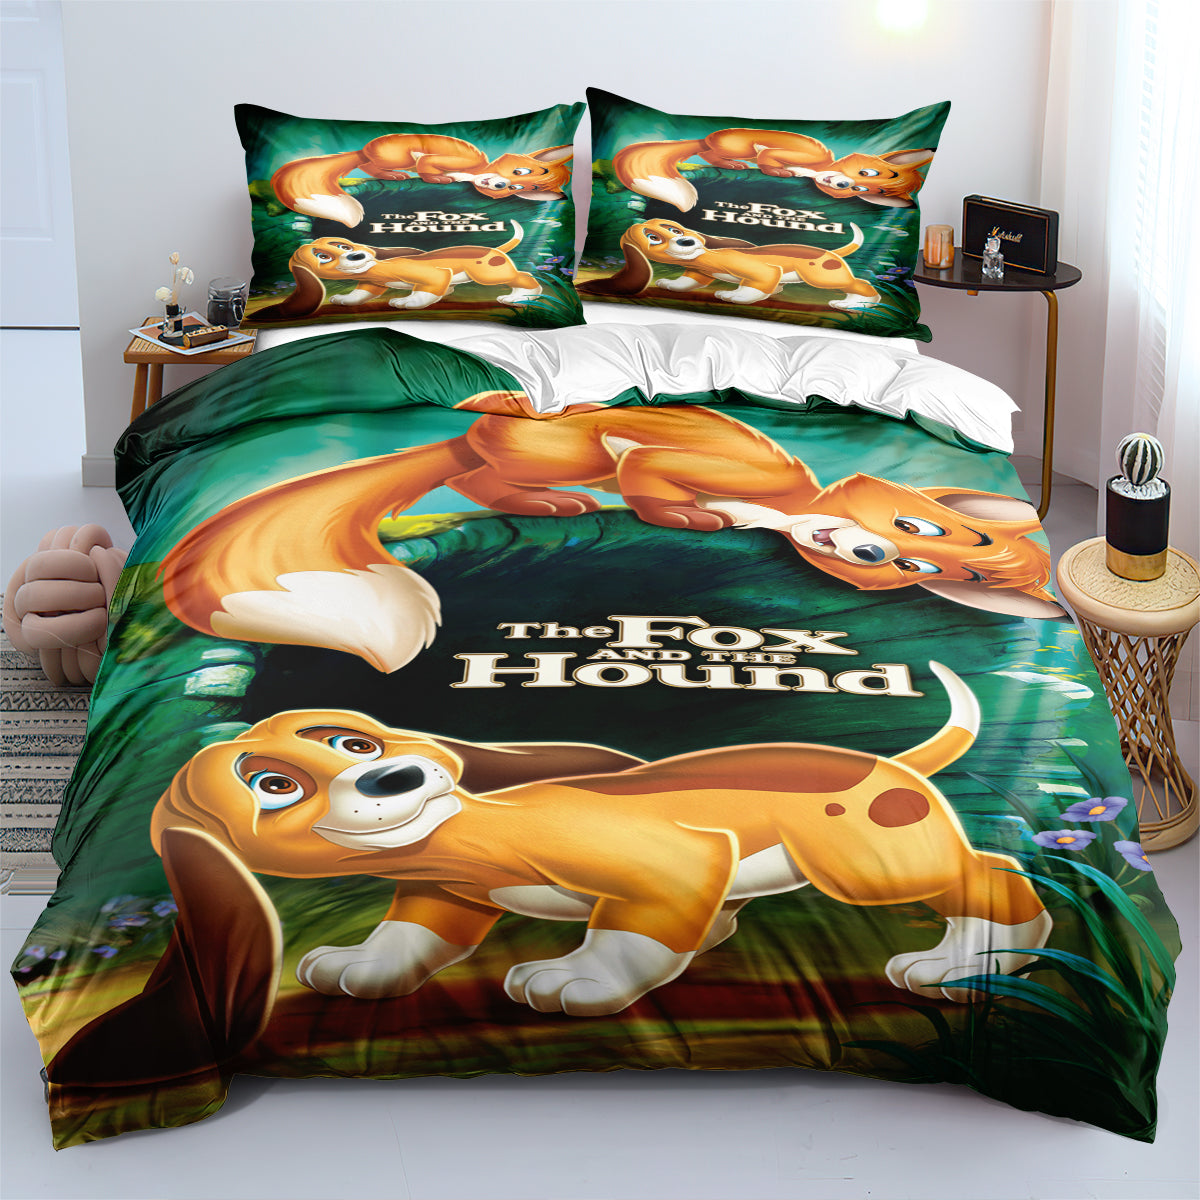 The Fox And The Hound Duvet Cover Quilt Cover Pillowcase Bedding Set